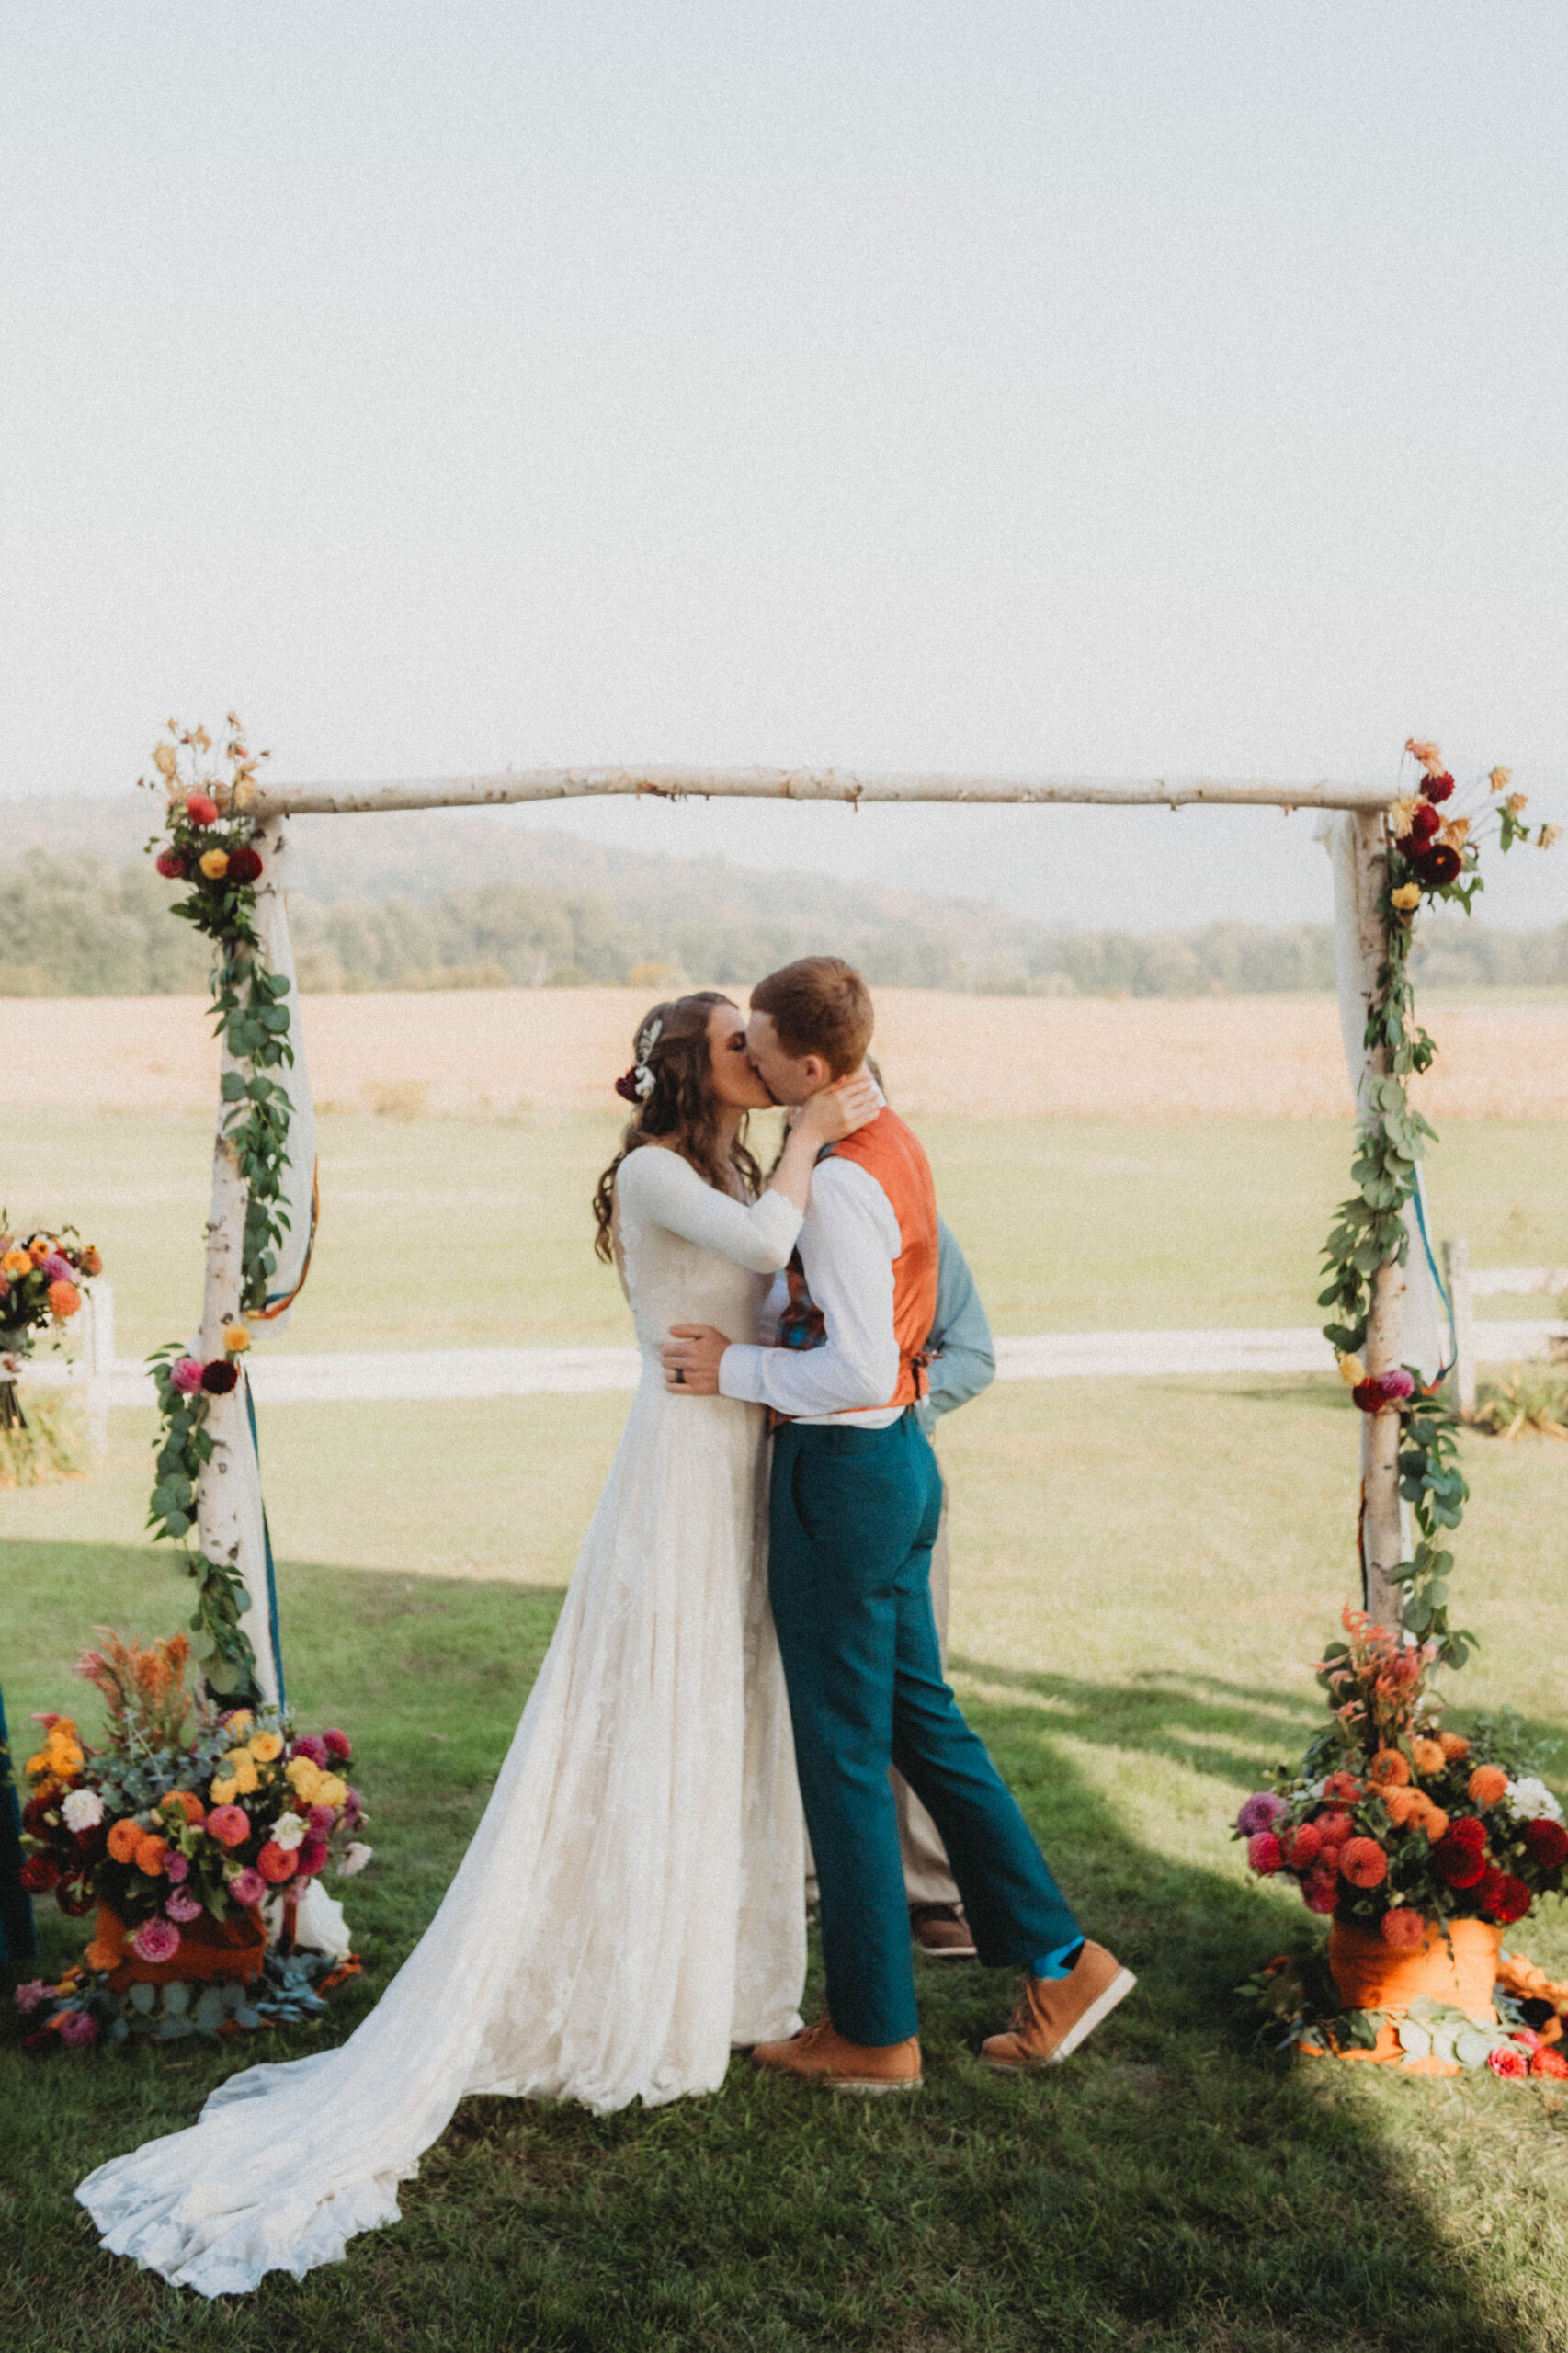 Emily and Sean kissing in front of their wedding arbor